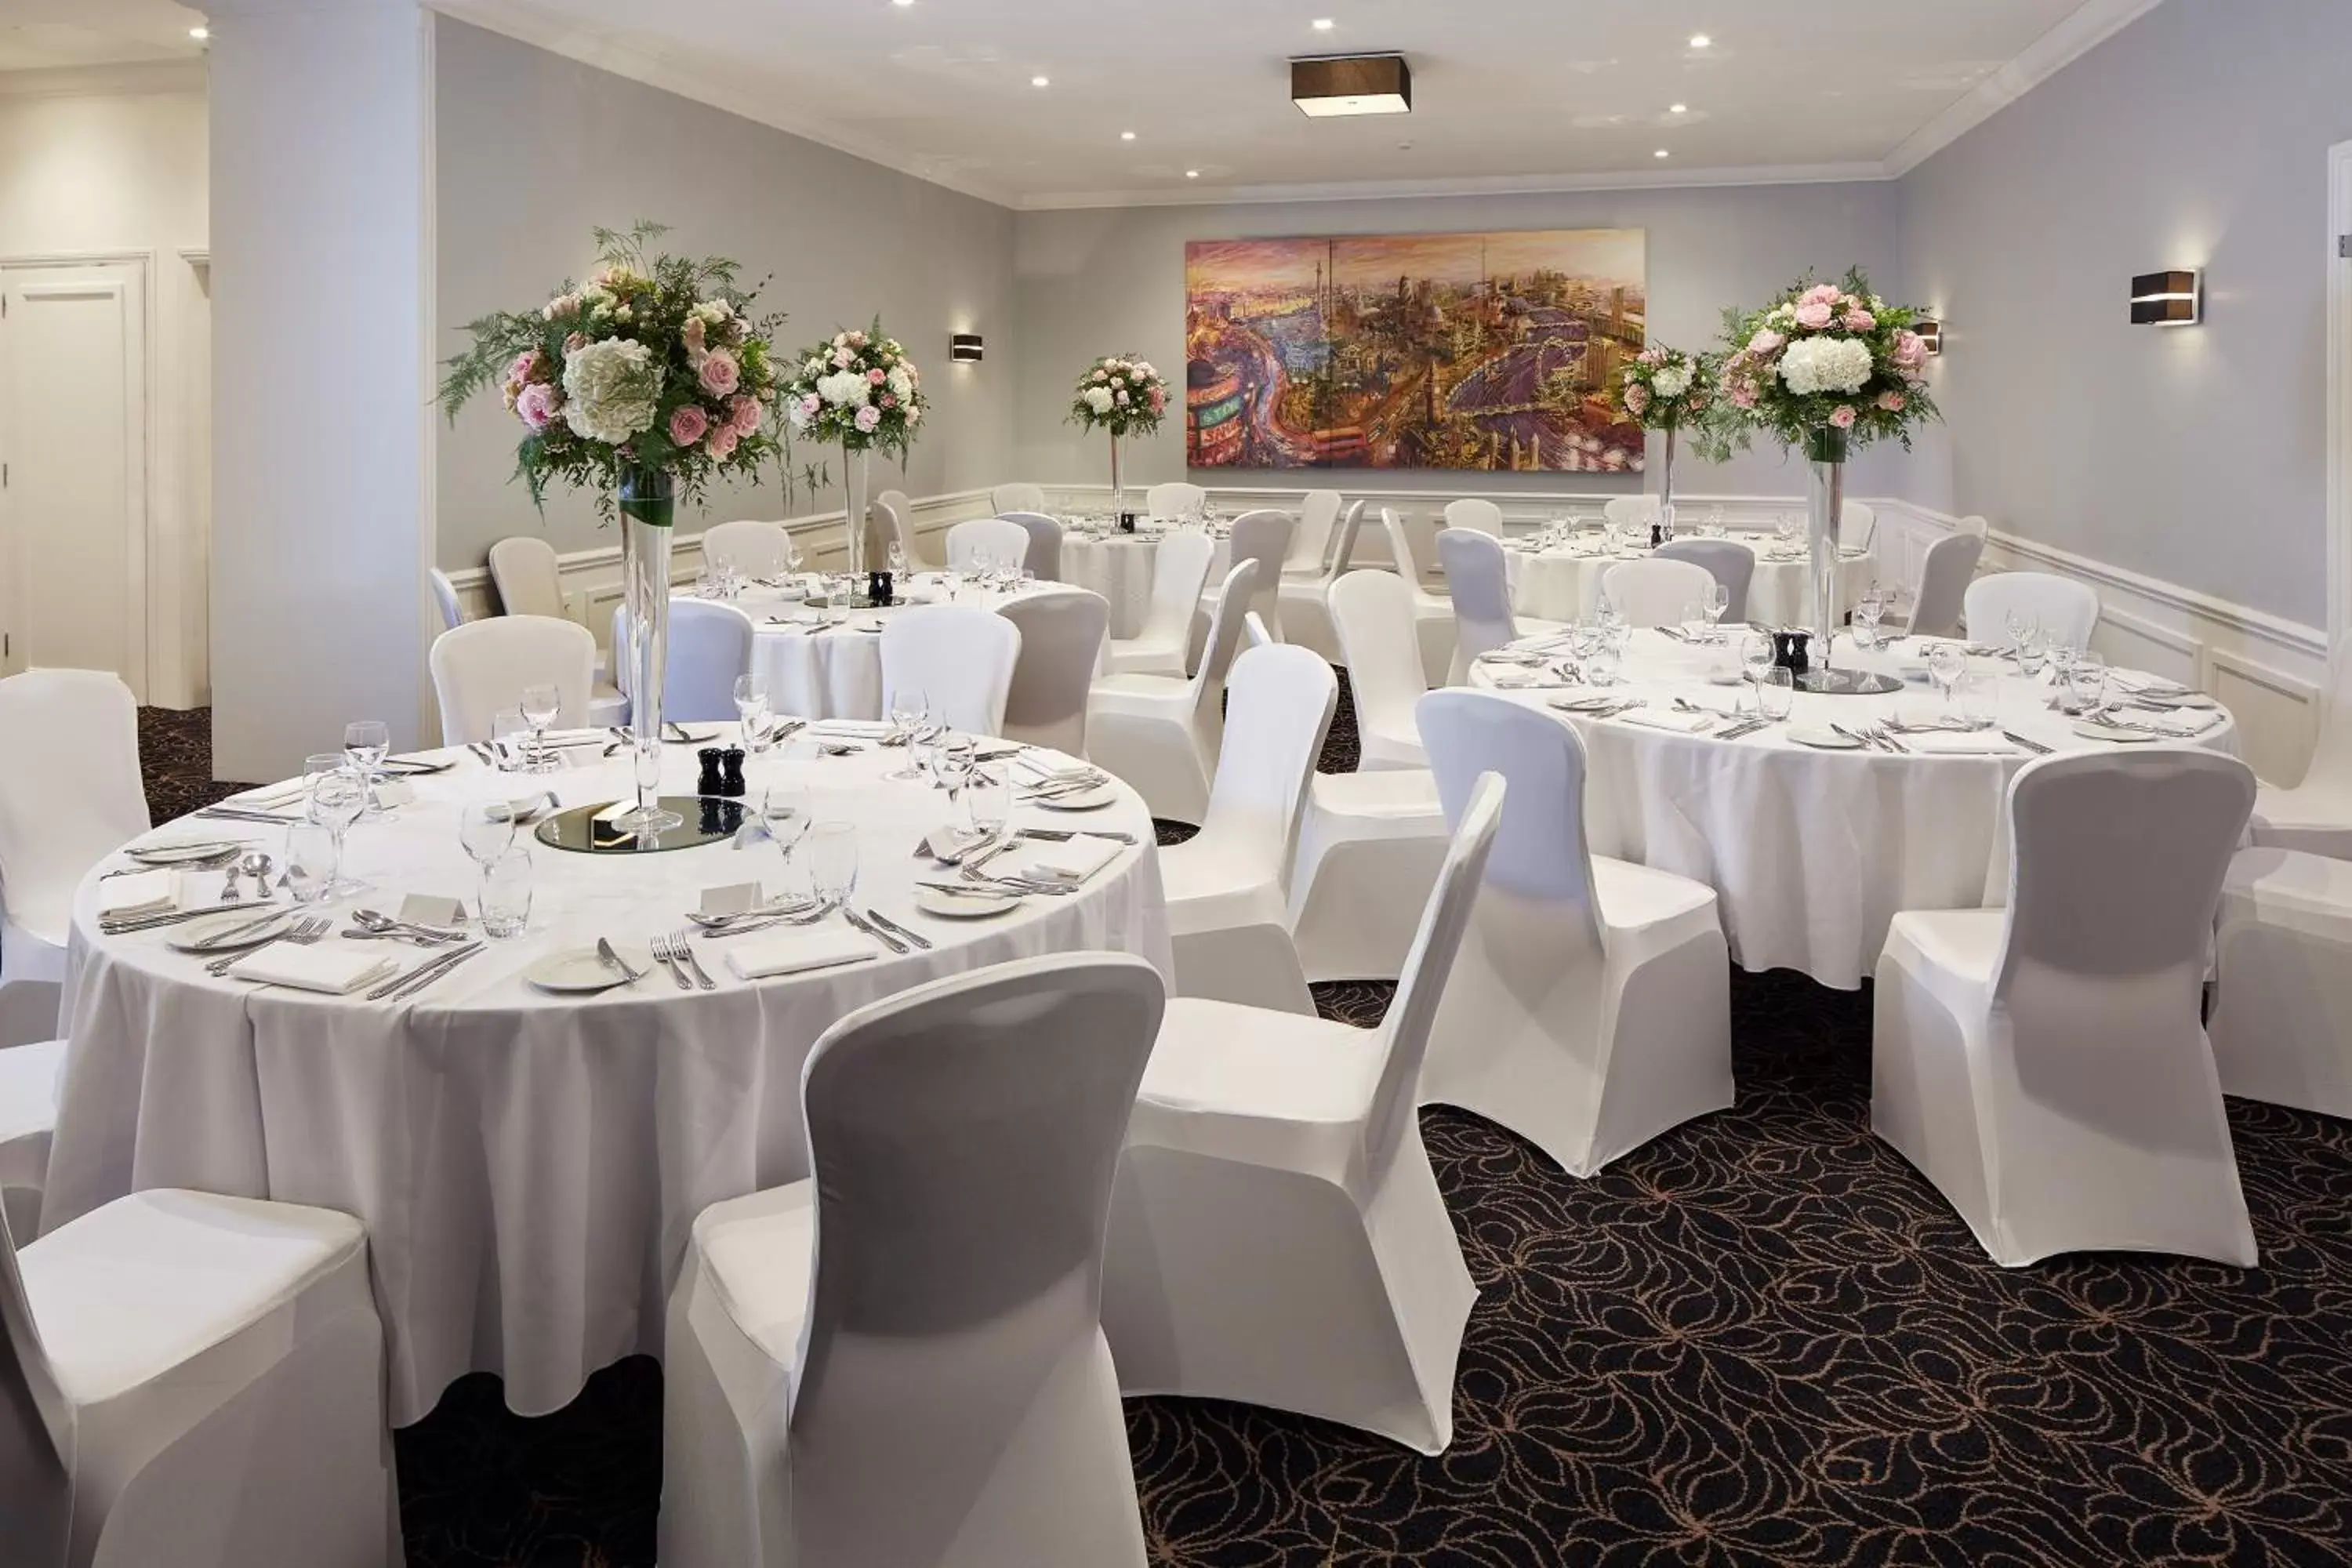 Banquet/Function facilities, Banquet Facilities in The Cavendish London